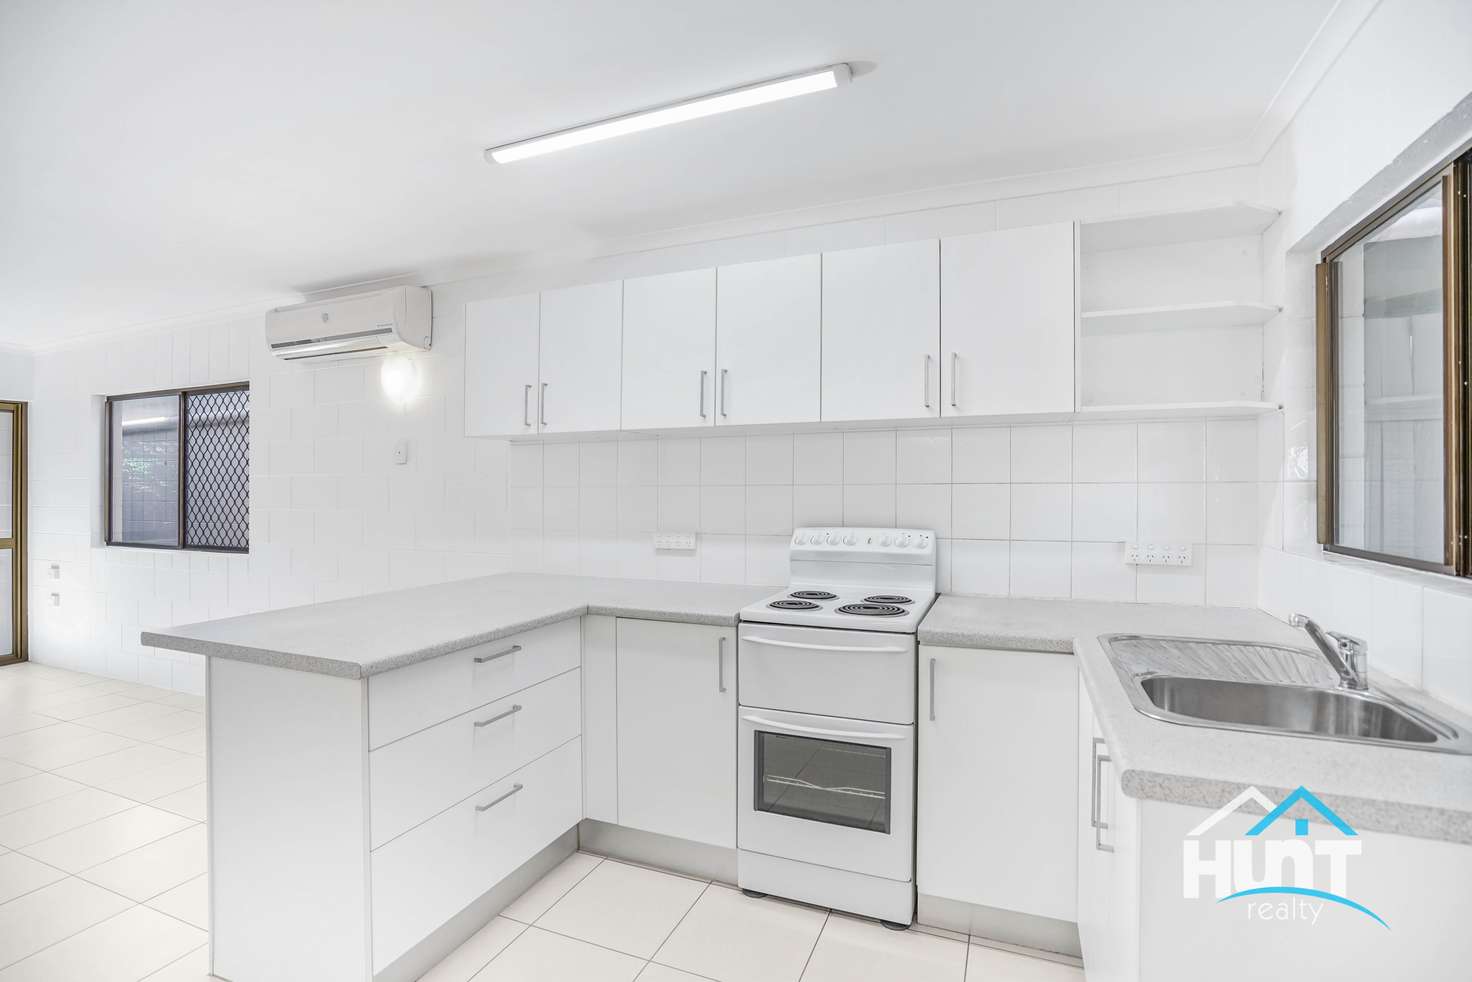 Main view of Homely unit listing, 8/2-8 Winkworth Street, Bungalow QLD 4870